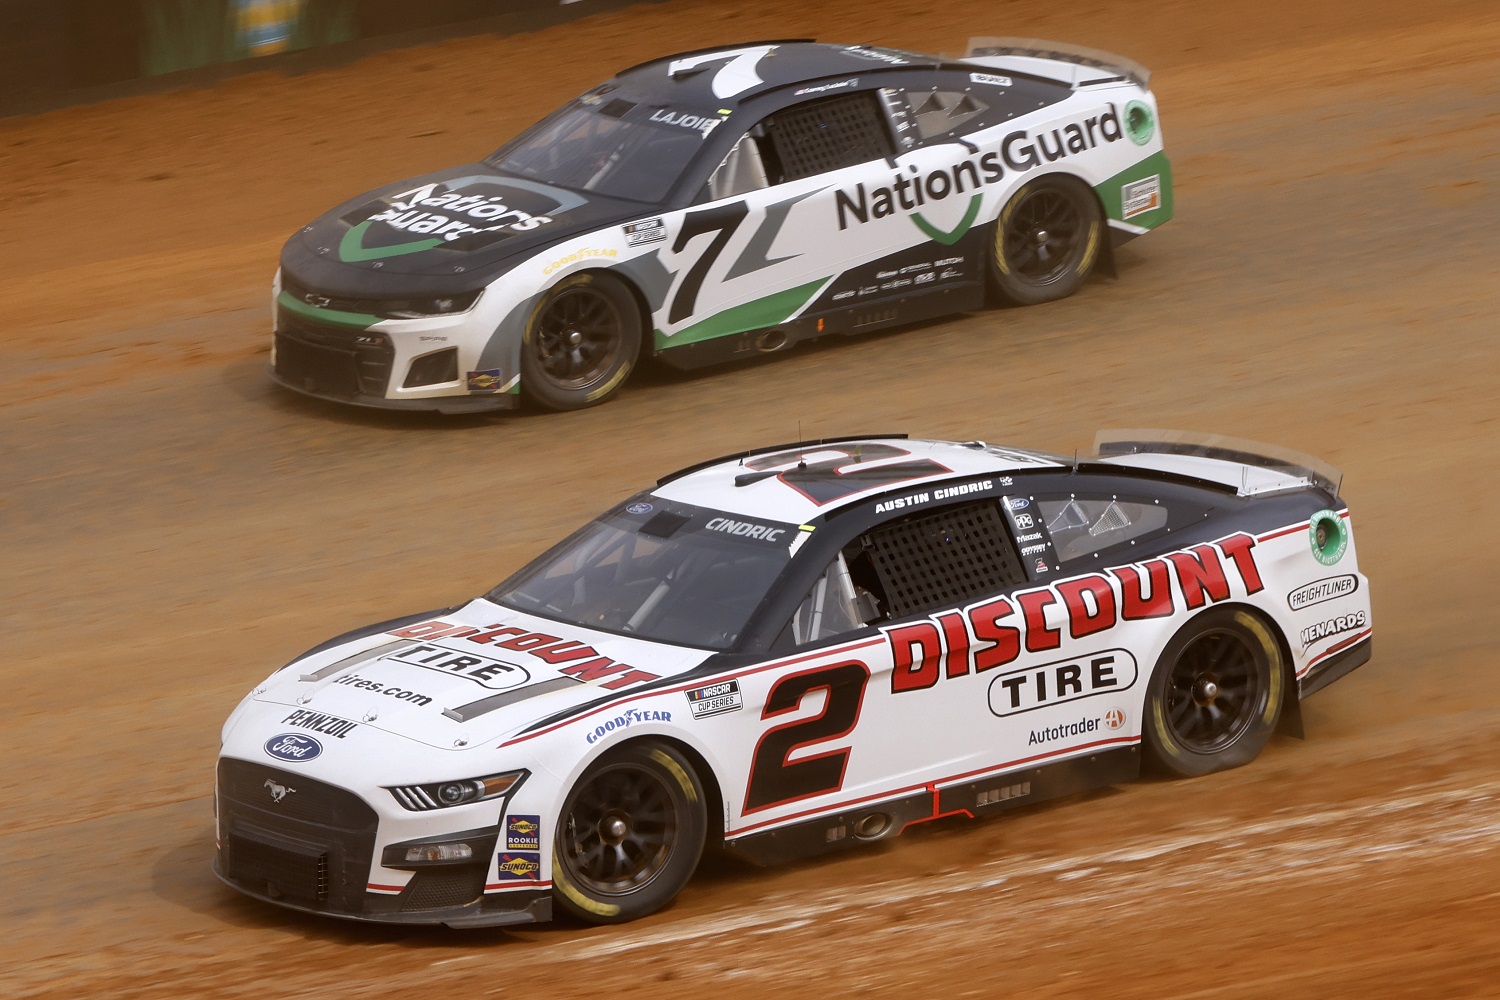 Austin Cindric in the No. 2 Ford and Corey LaJoie in the No. 7 Chevrolet practice for the NASCAR Cup Series Food City Dirt Race on April 15, 2022, at Bristol Motor Speedway. | Joe Robbins/Icon Sportswire via Getty Images